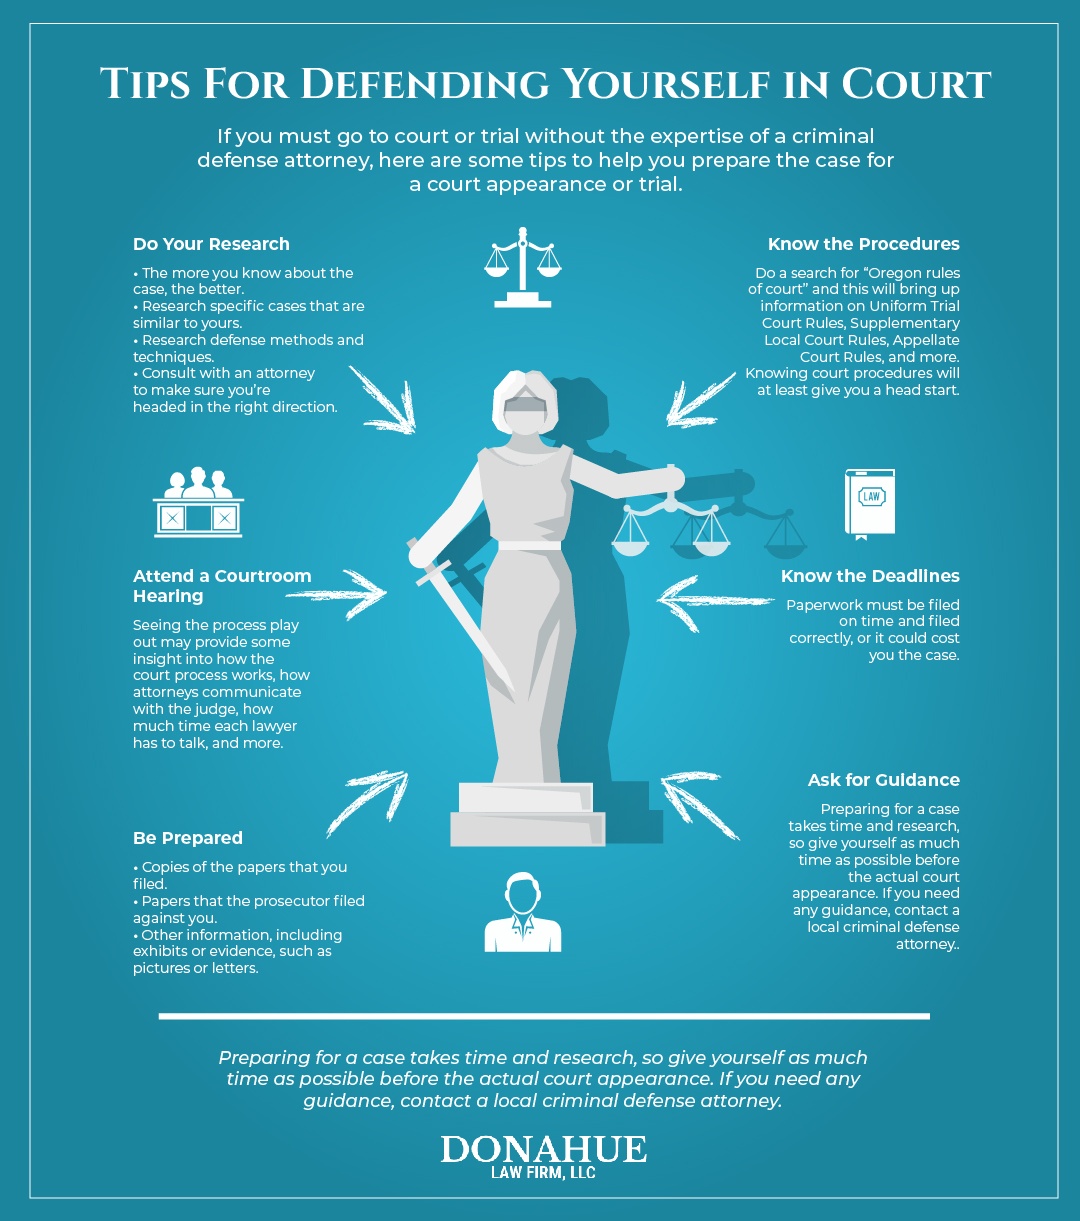 Tips For Defending Yourself in Court